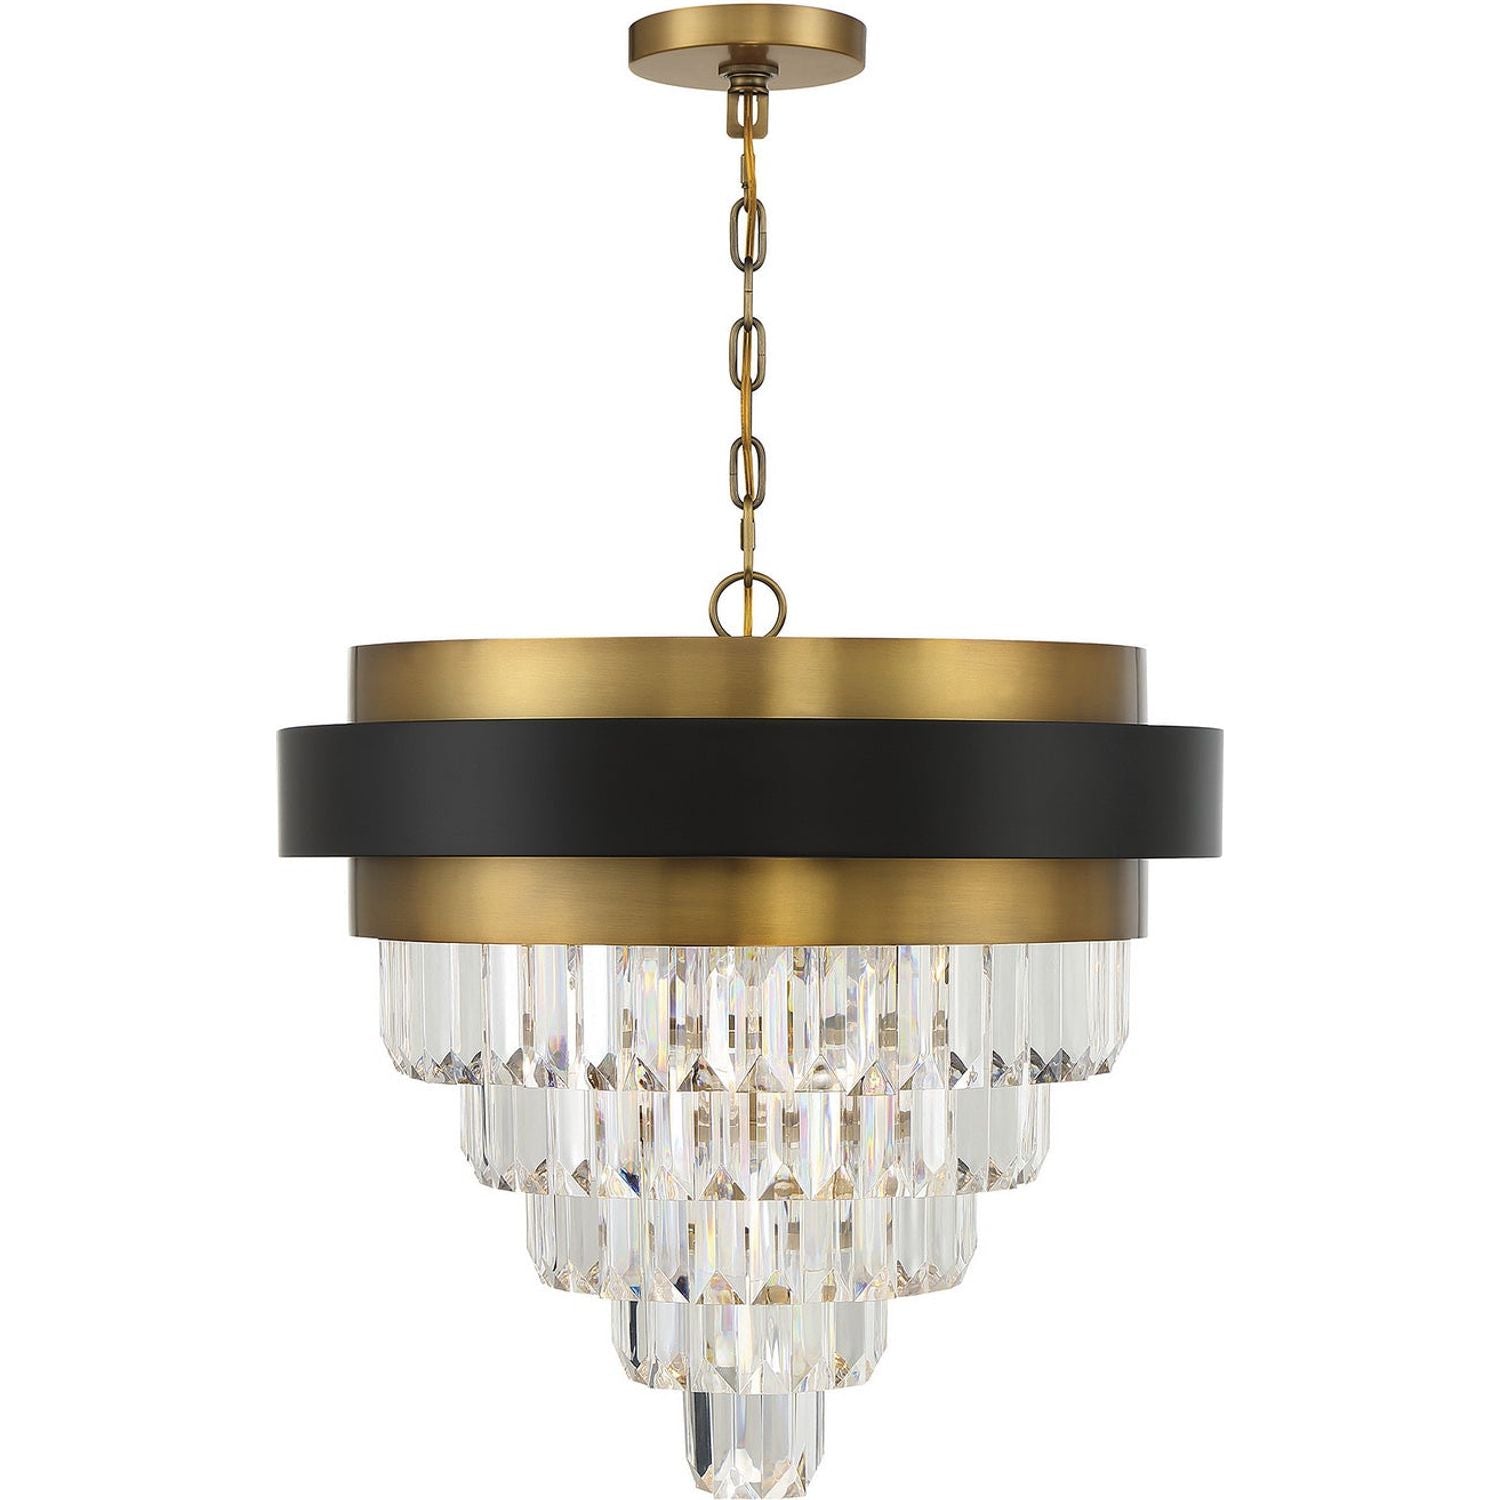 Savoy House - 1-1669-4-143 - Four Light Chandelier - Marquise - Matte Black with Warm Brass Accents